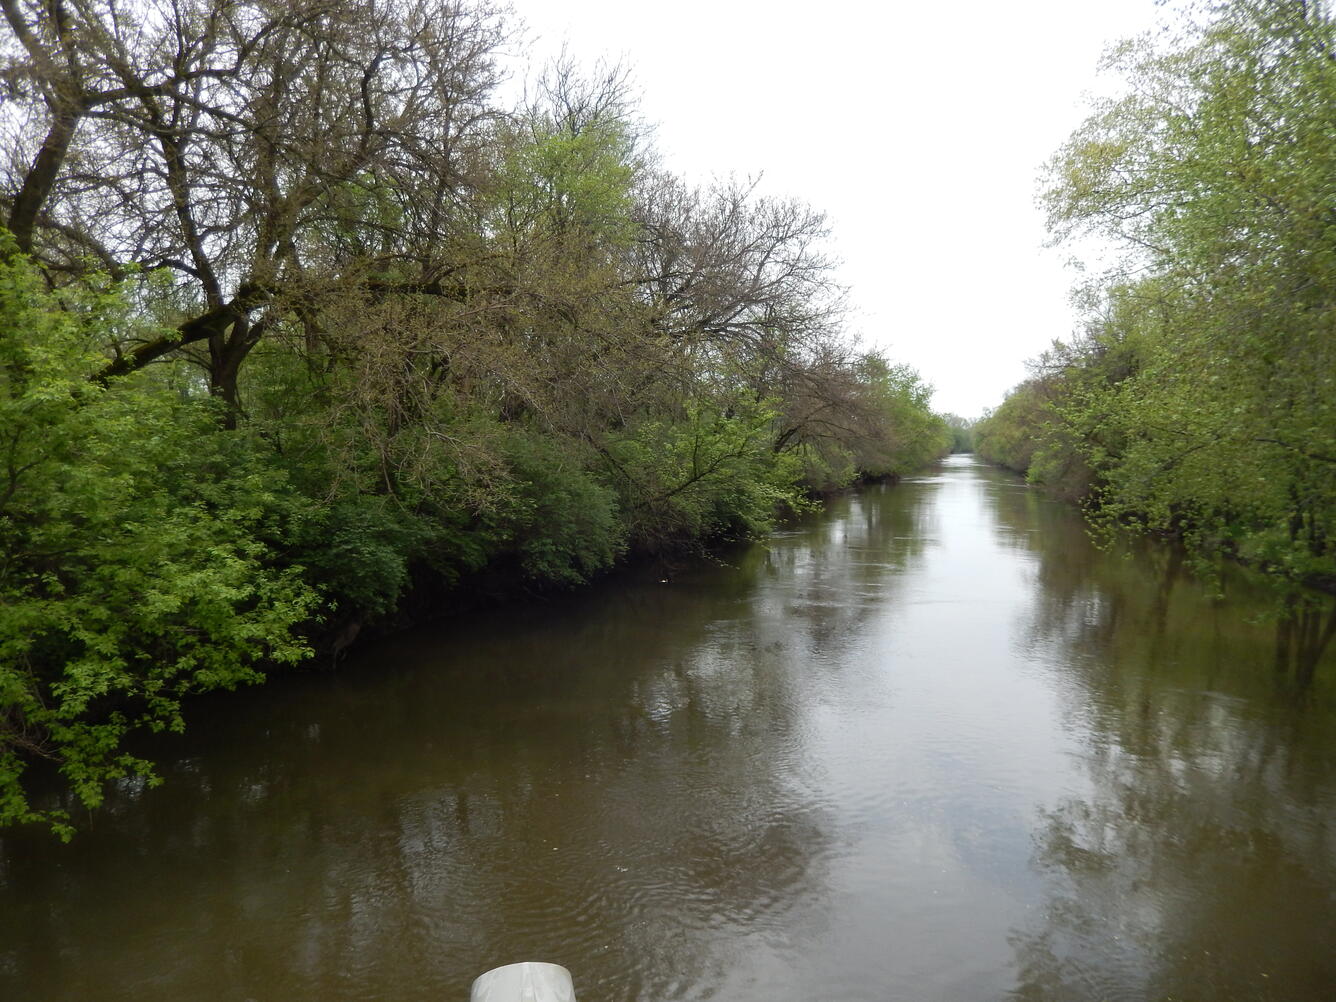 Kanakee River at Davis, IN - downstream of channel